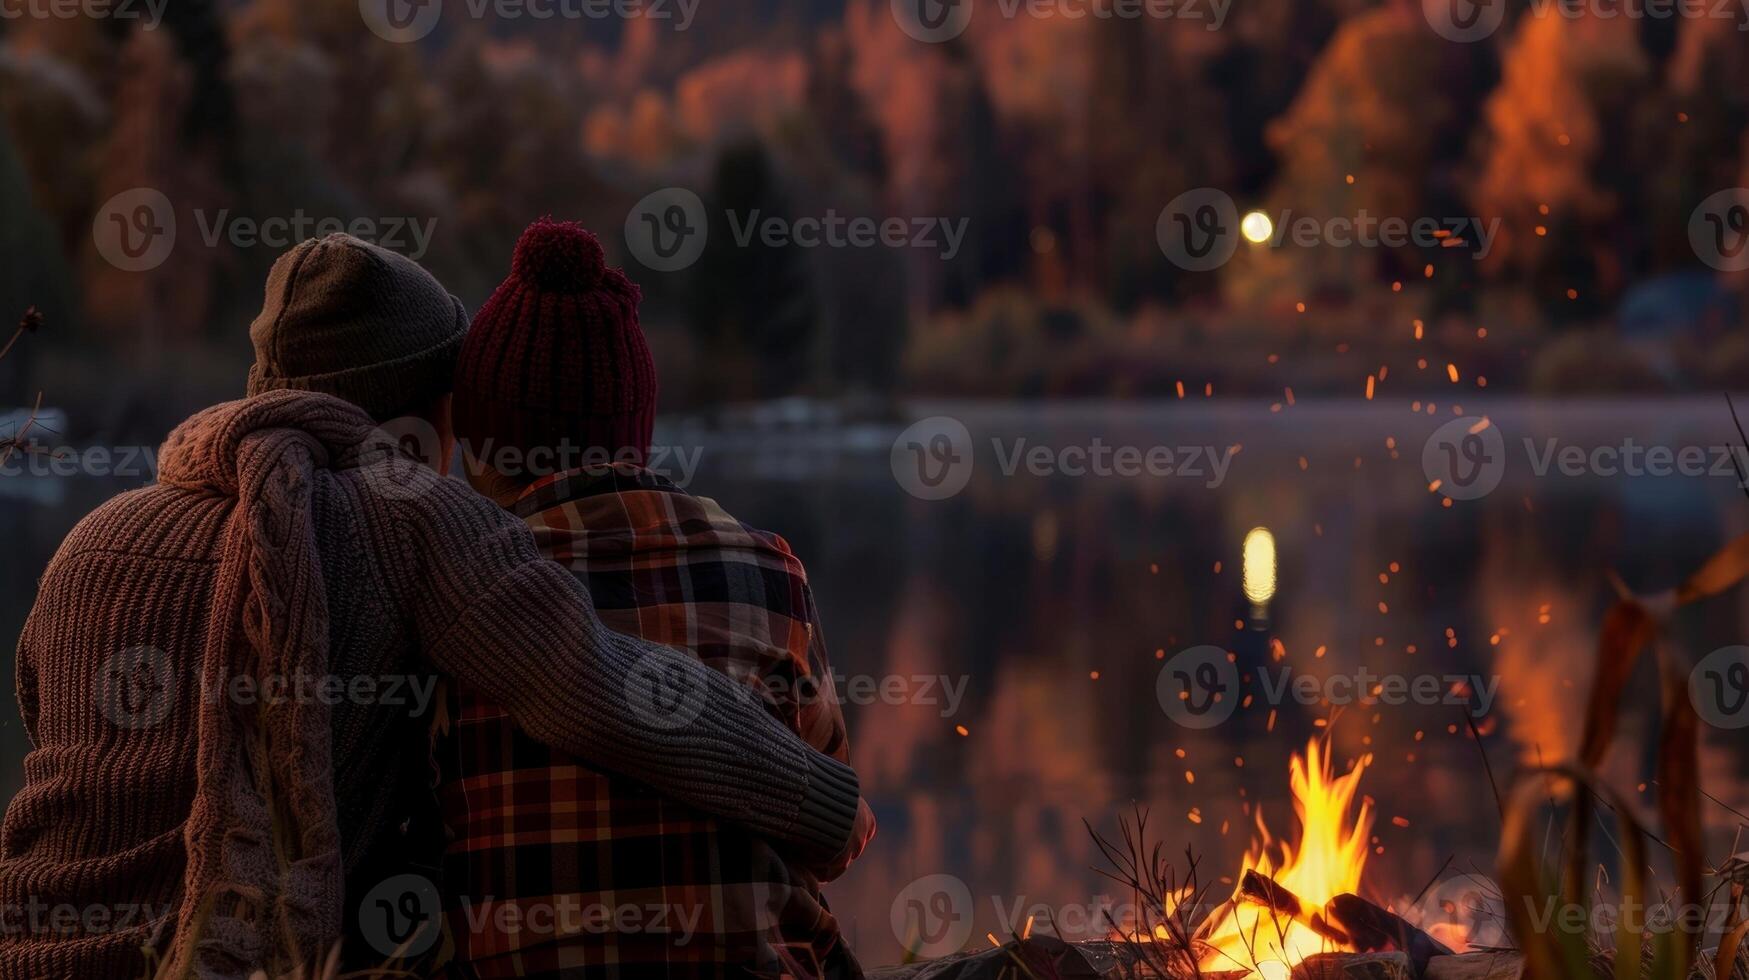 The warmth of the fire brings a sense of comfort as the couple cuddles up together enjoying the peacefulness of nature. 2d flat cartoon photo